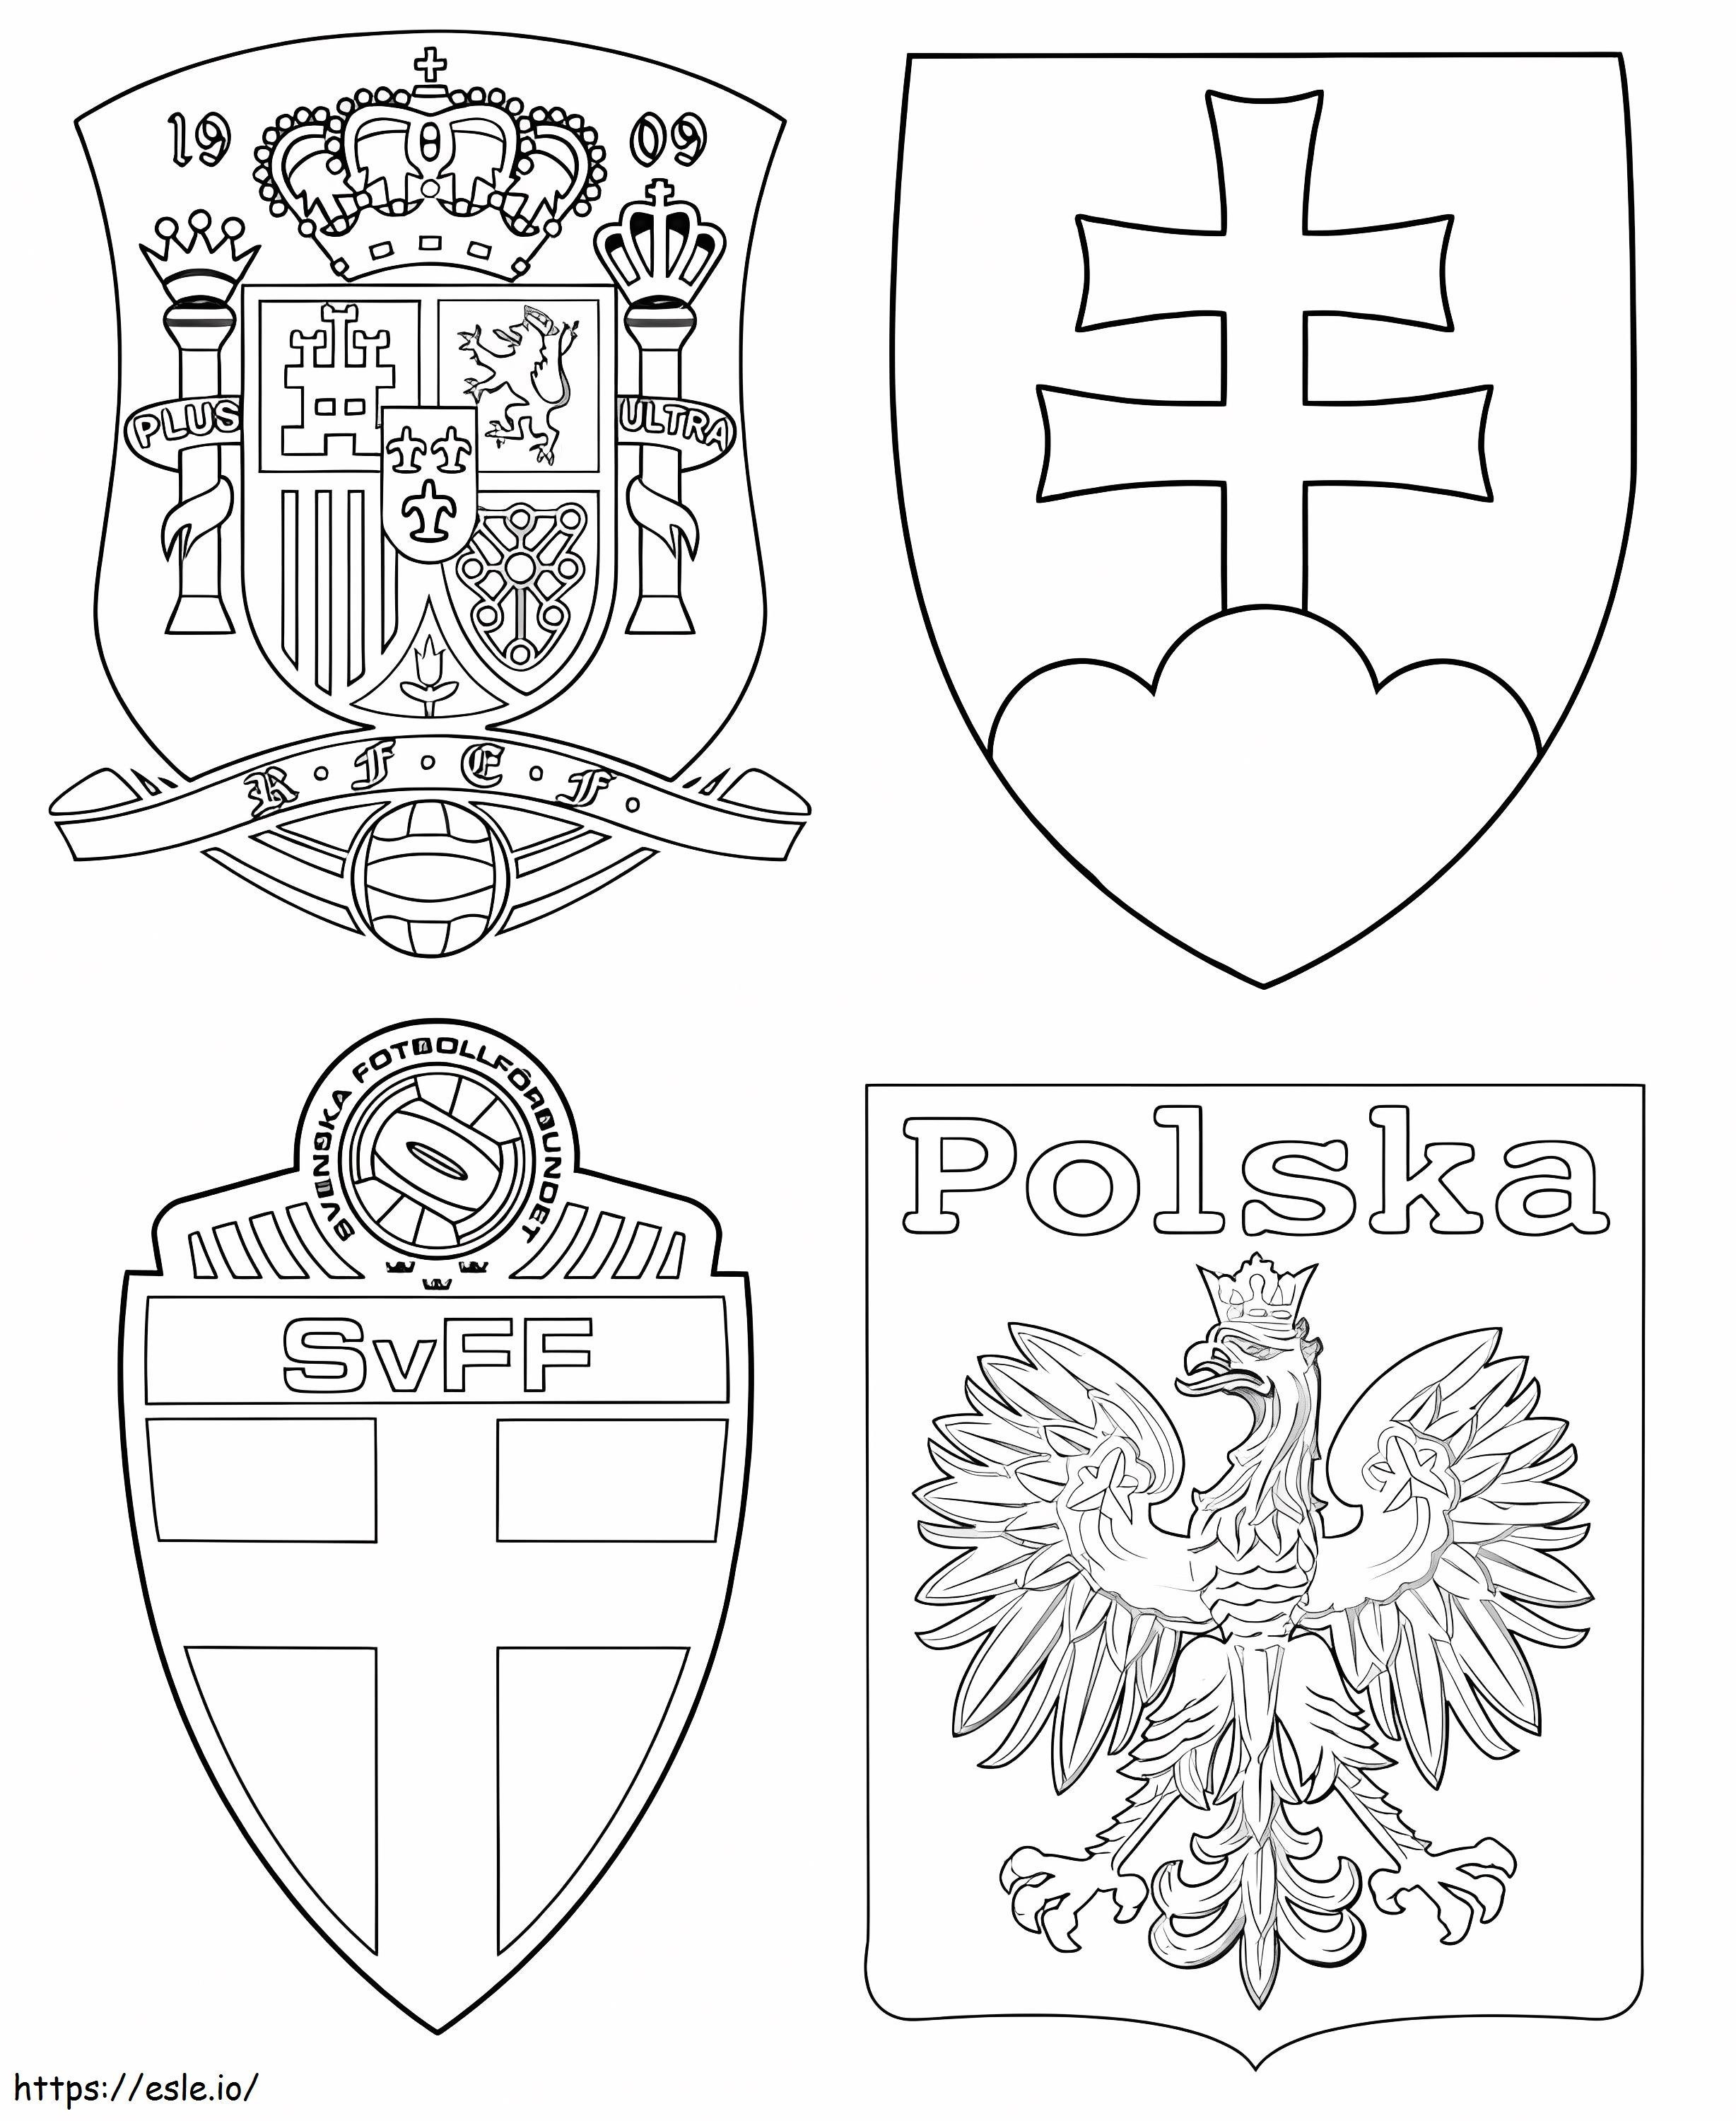 Group E Spain Sweden Poland Slovakia coloring page